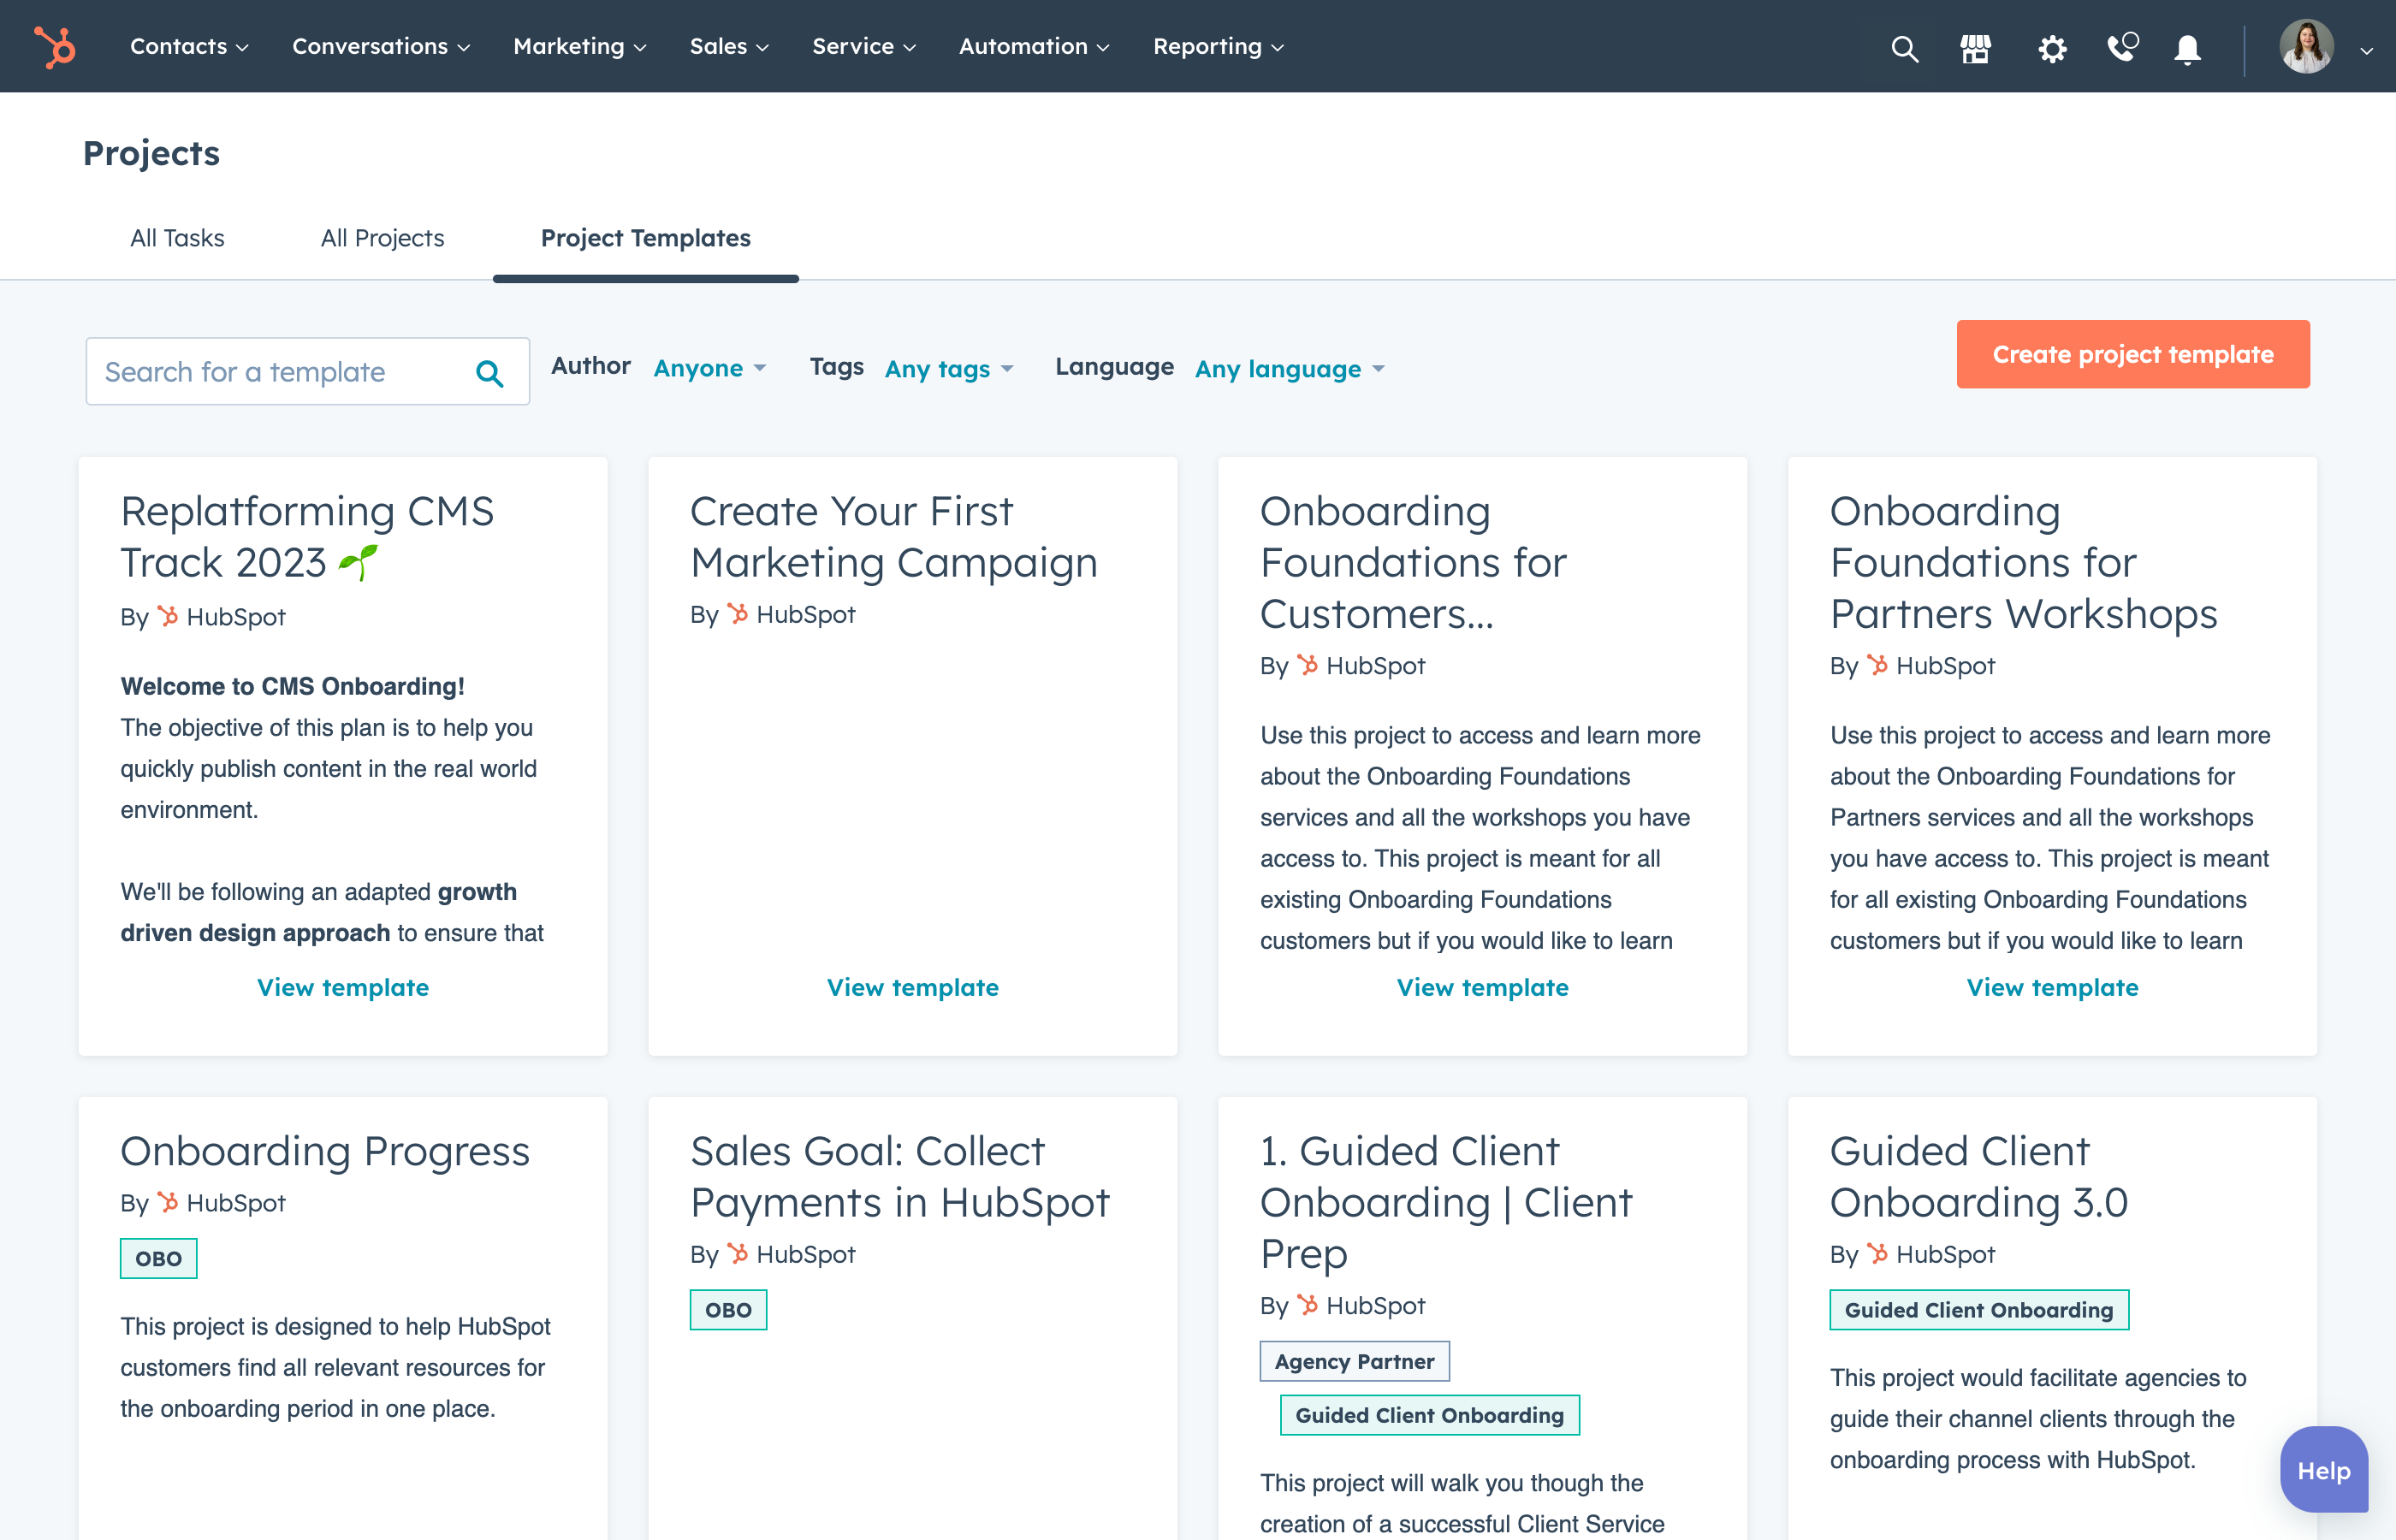 Project templates in HubSpot Projects